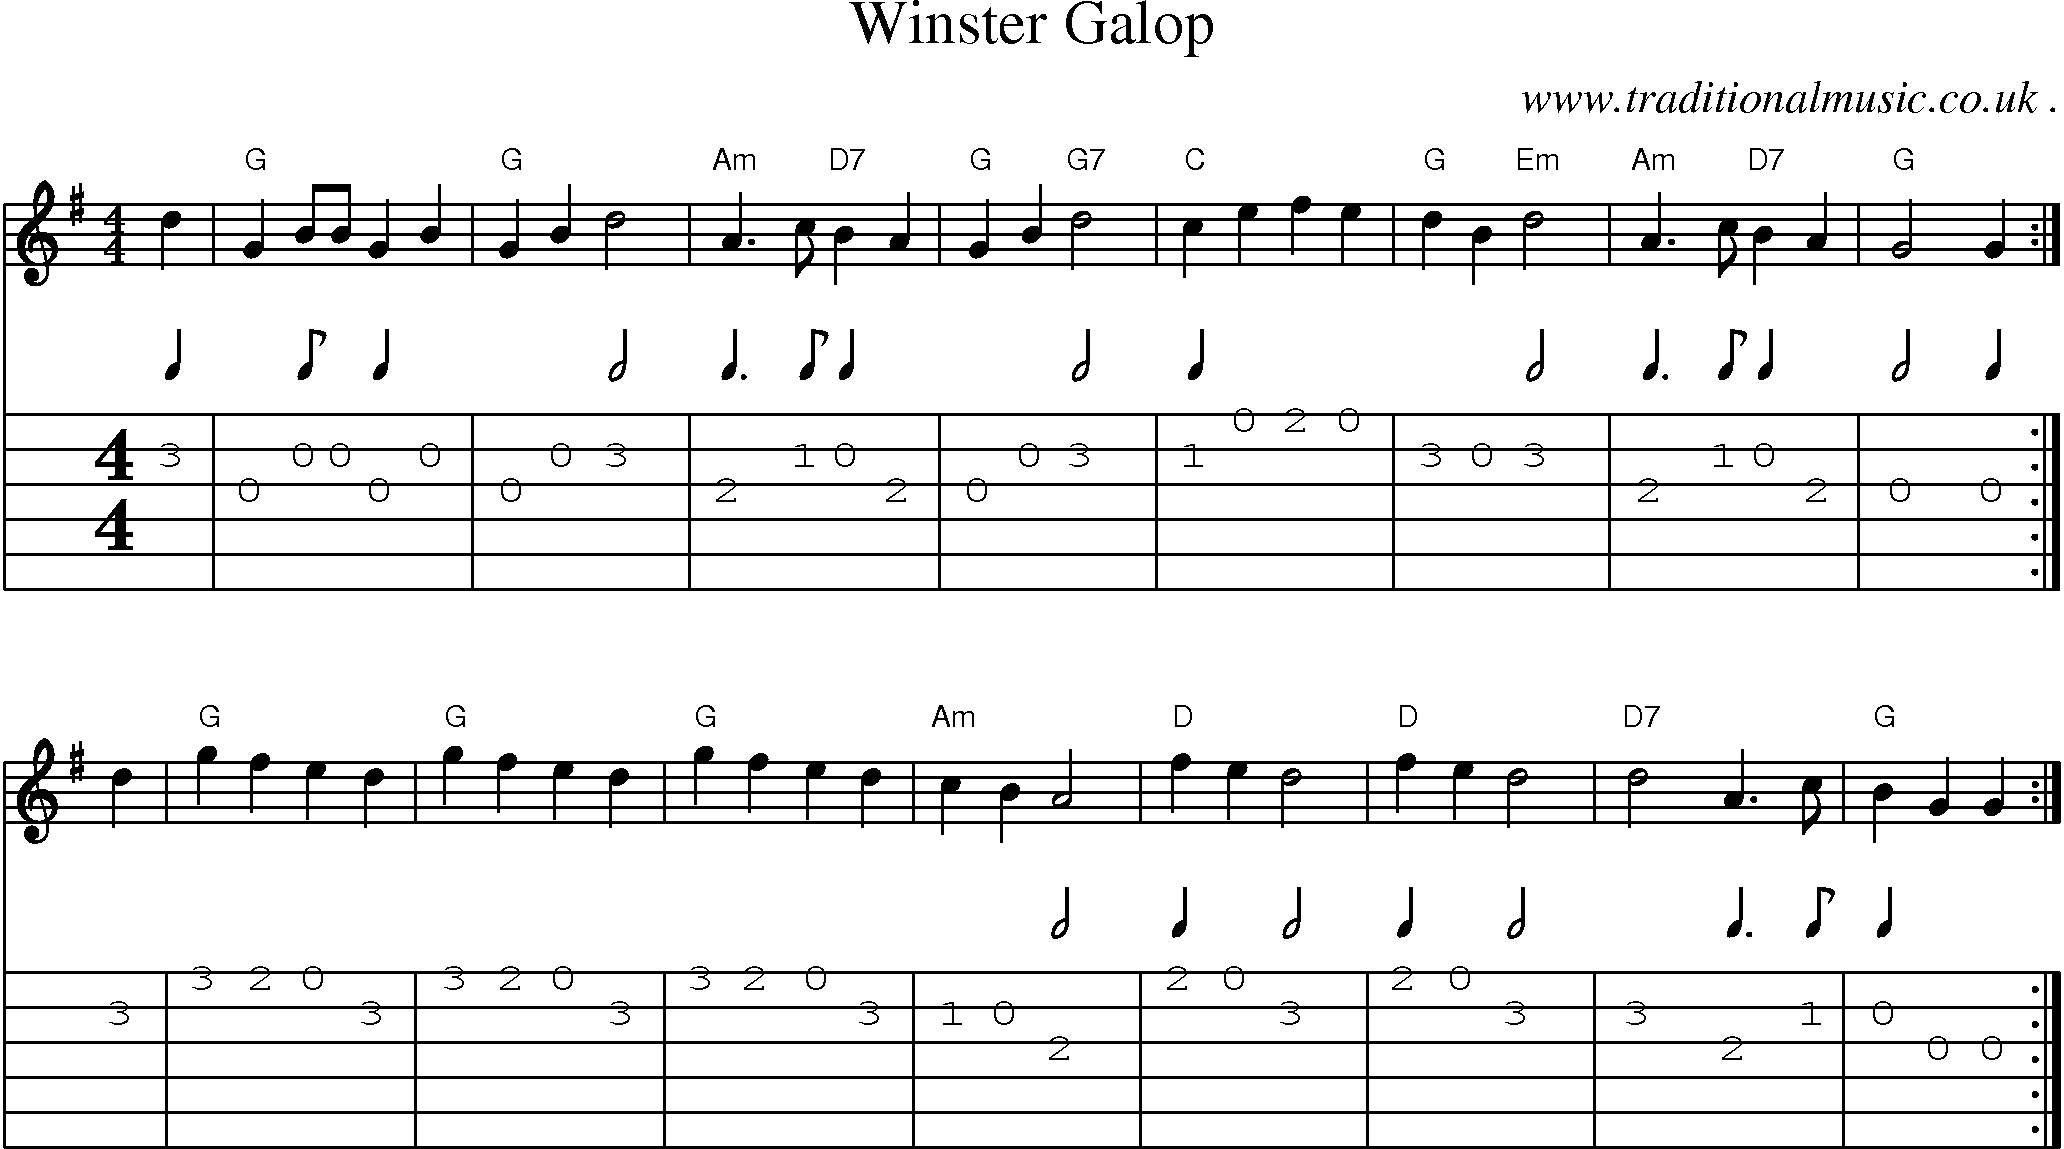 Sheet-Music and Guitar Tabs for Winster Galop